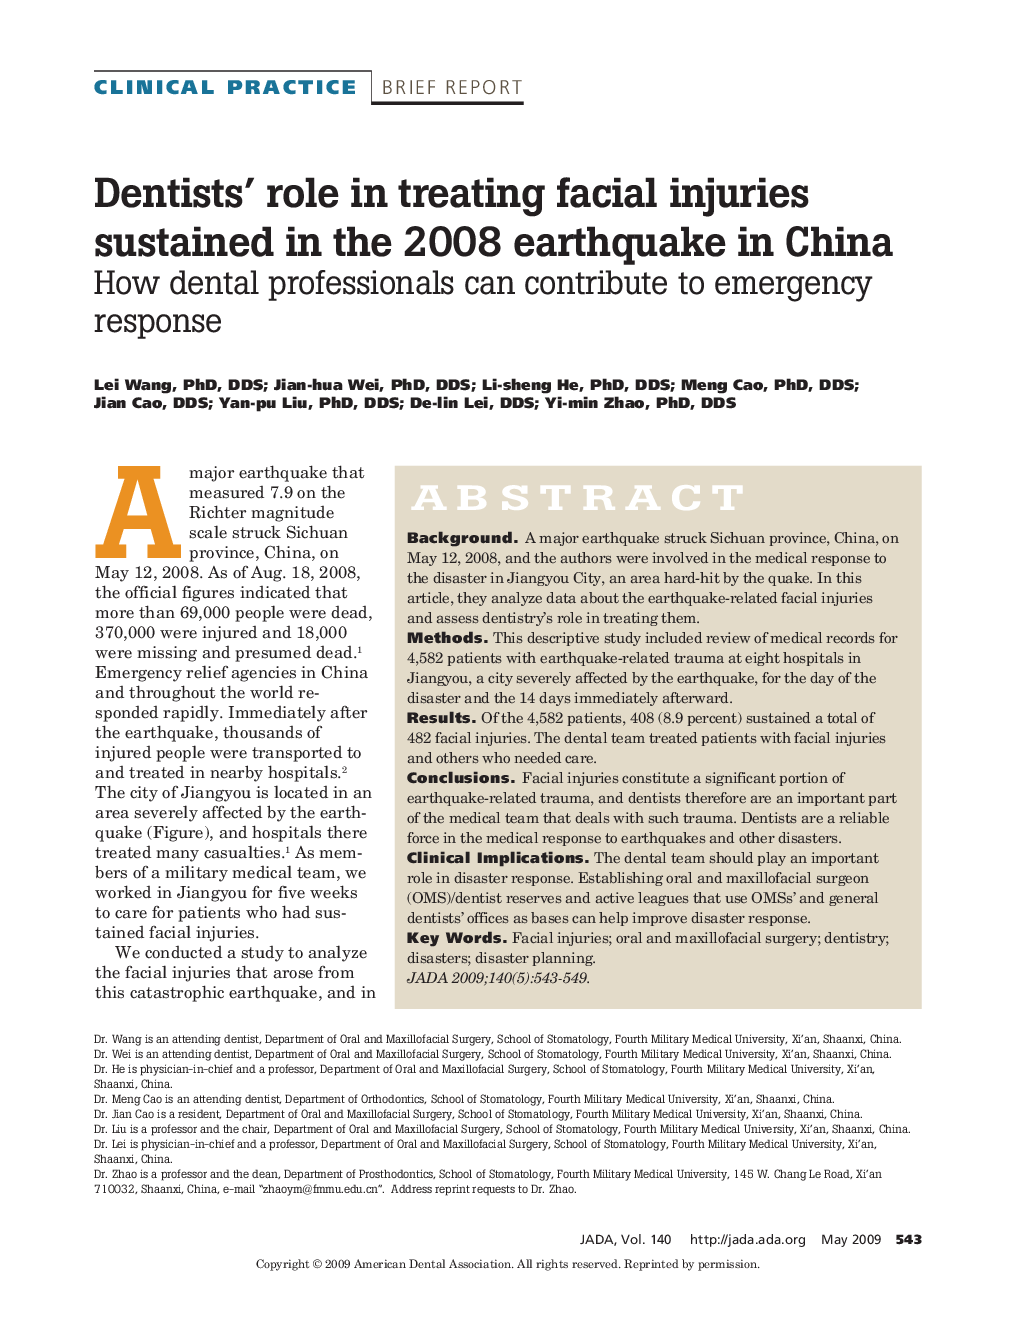 Dentists' Role in Treating Facial Injuries Sustained in the 2008 Earthquake in China : How Dental Professionals Can Contribute to Emergency Response